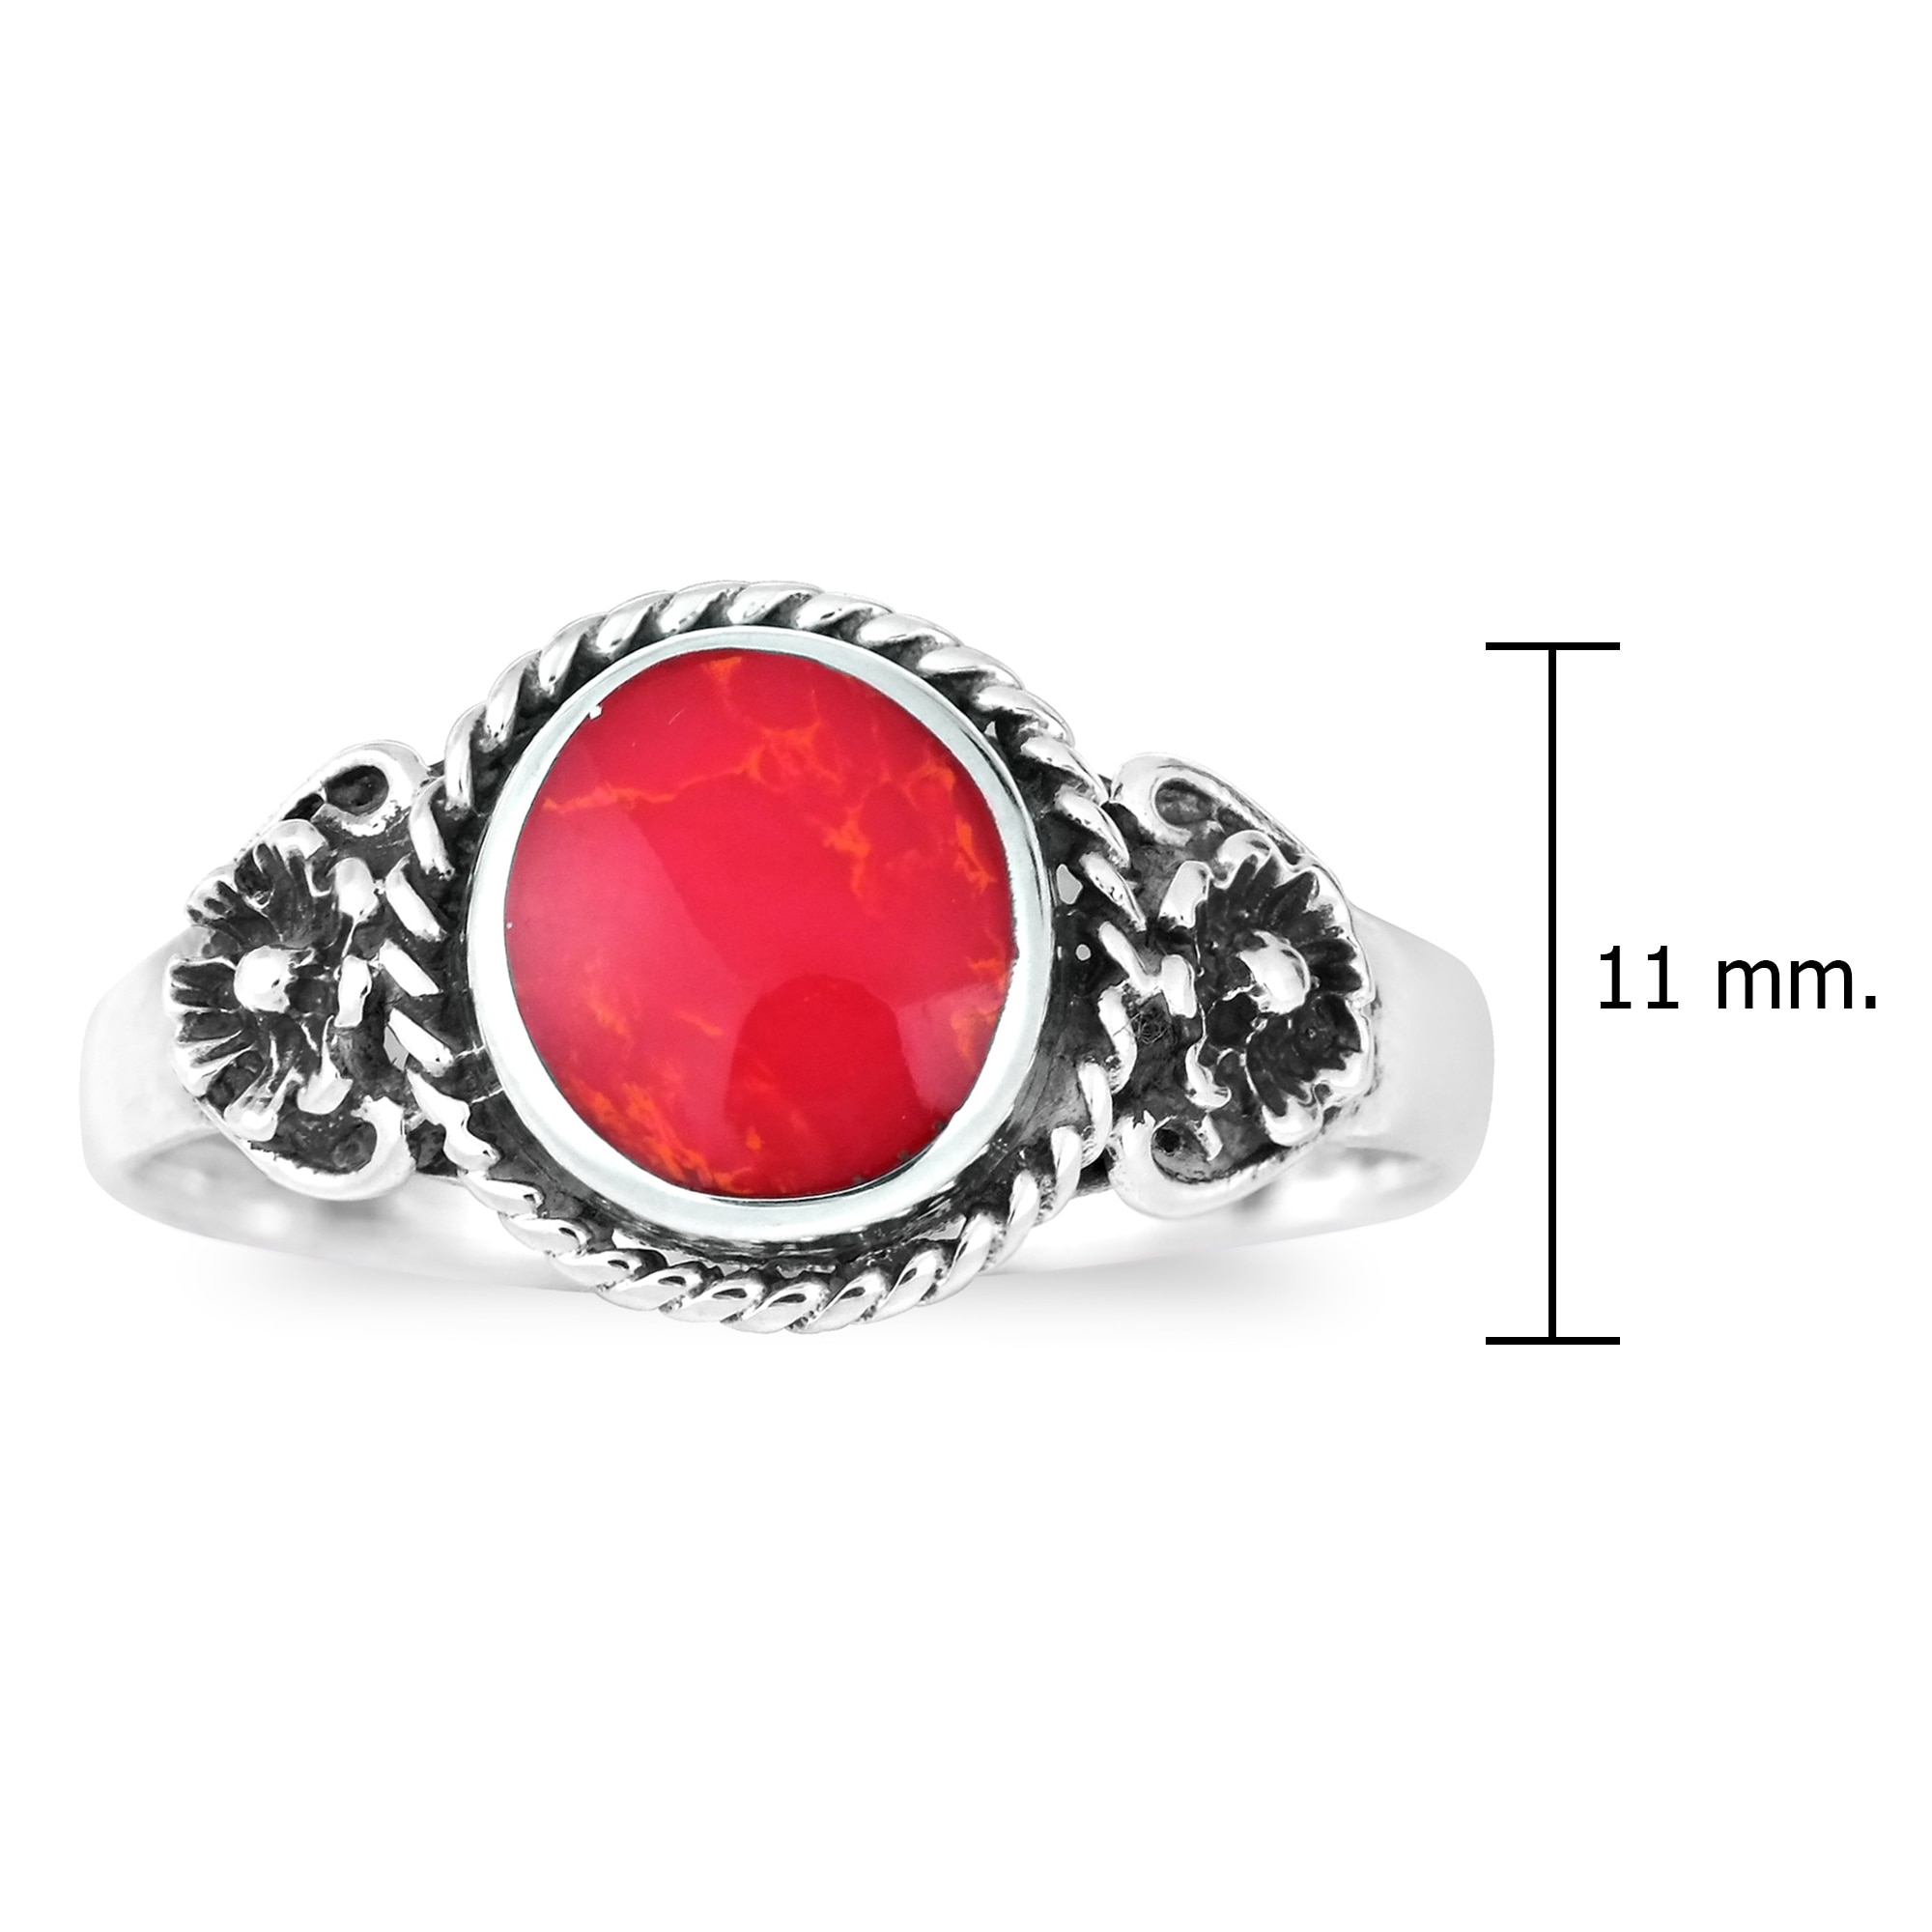 AeraVida Majestic Swirl Swan Reconstructed Red Coral Wings Sterling Silver Ring